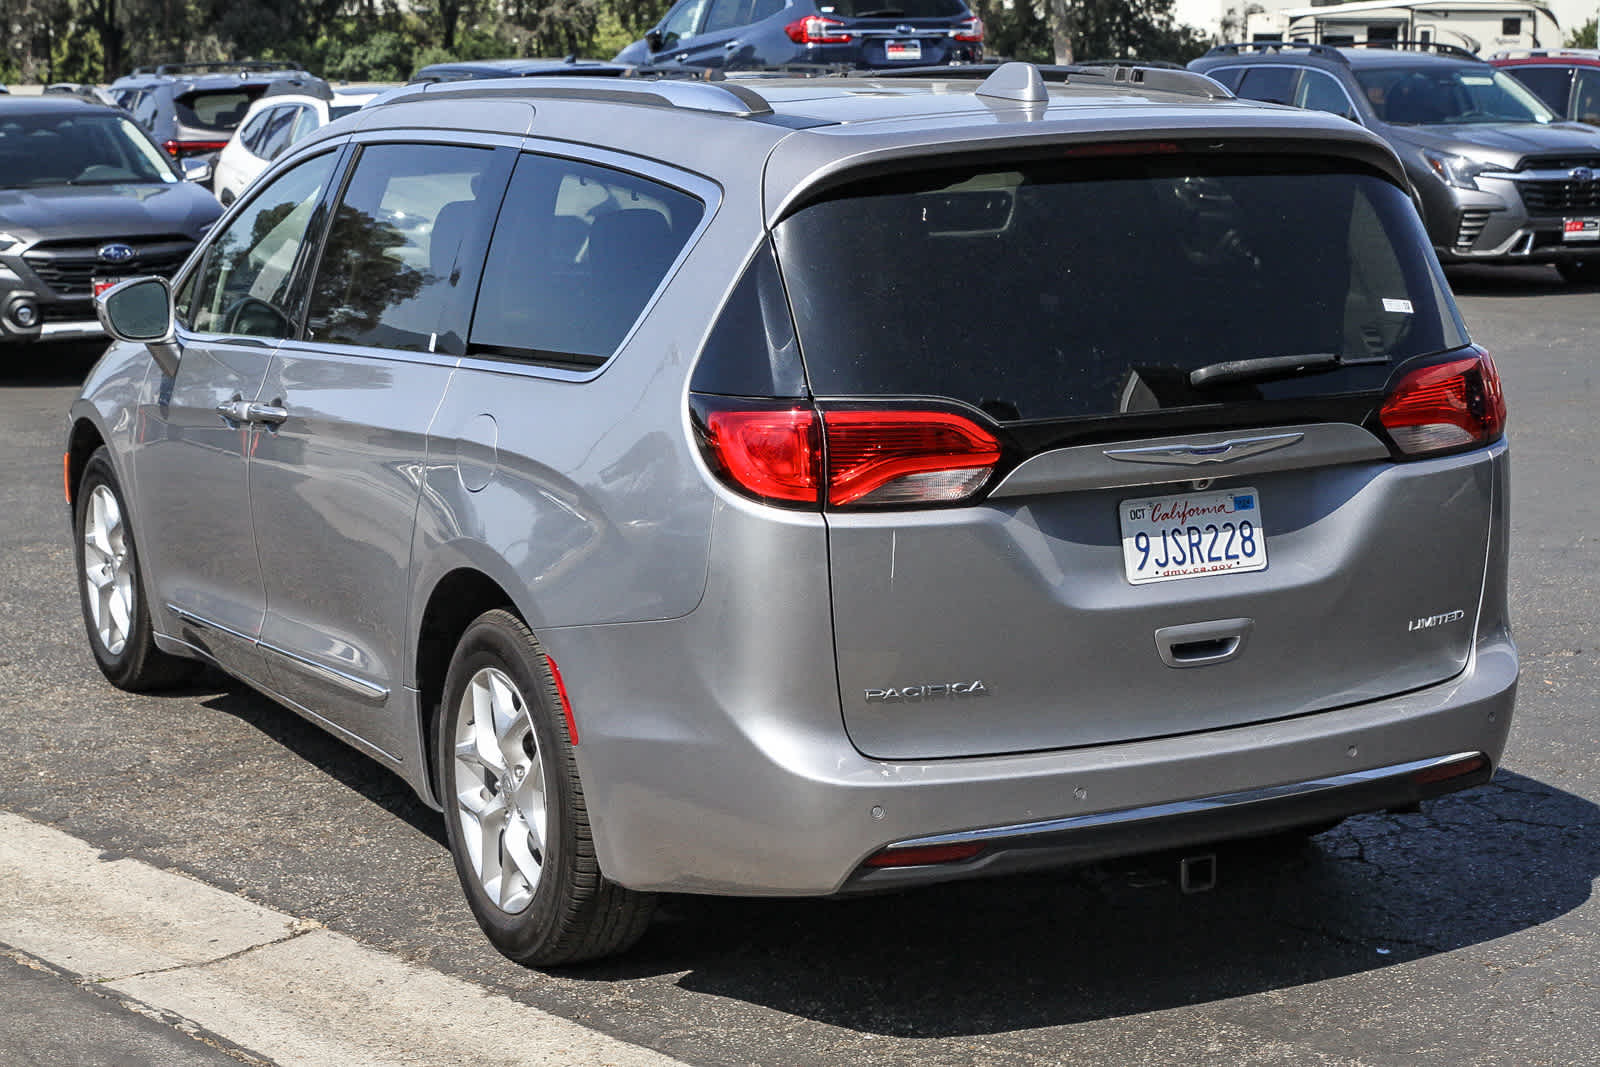 2020 Chrysler Pacifica Limited 8